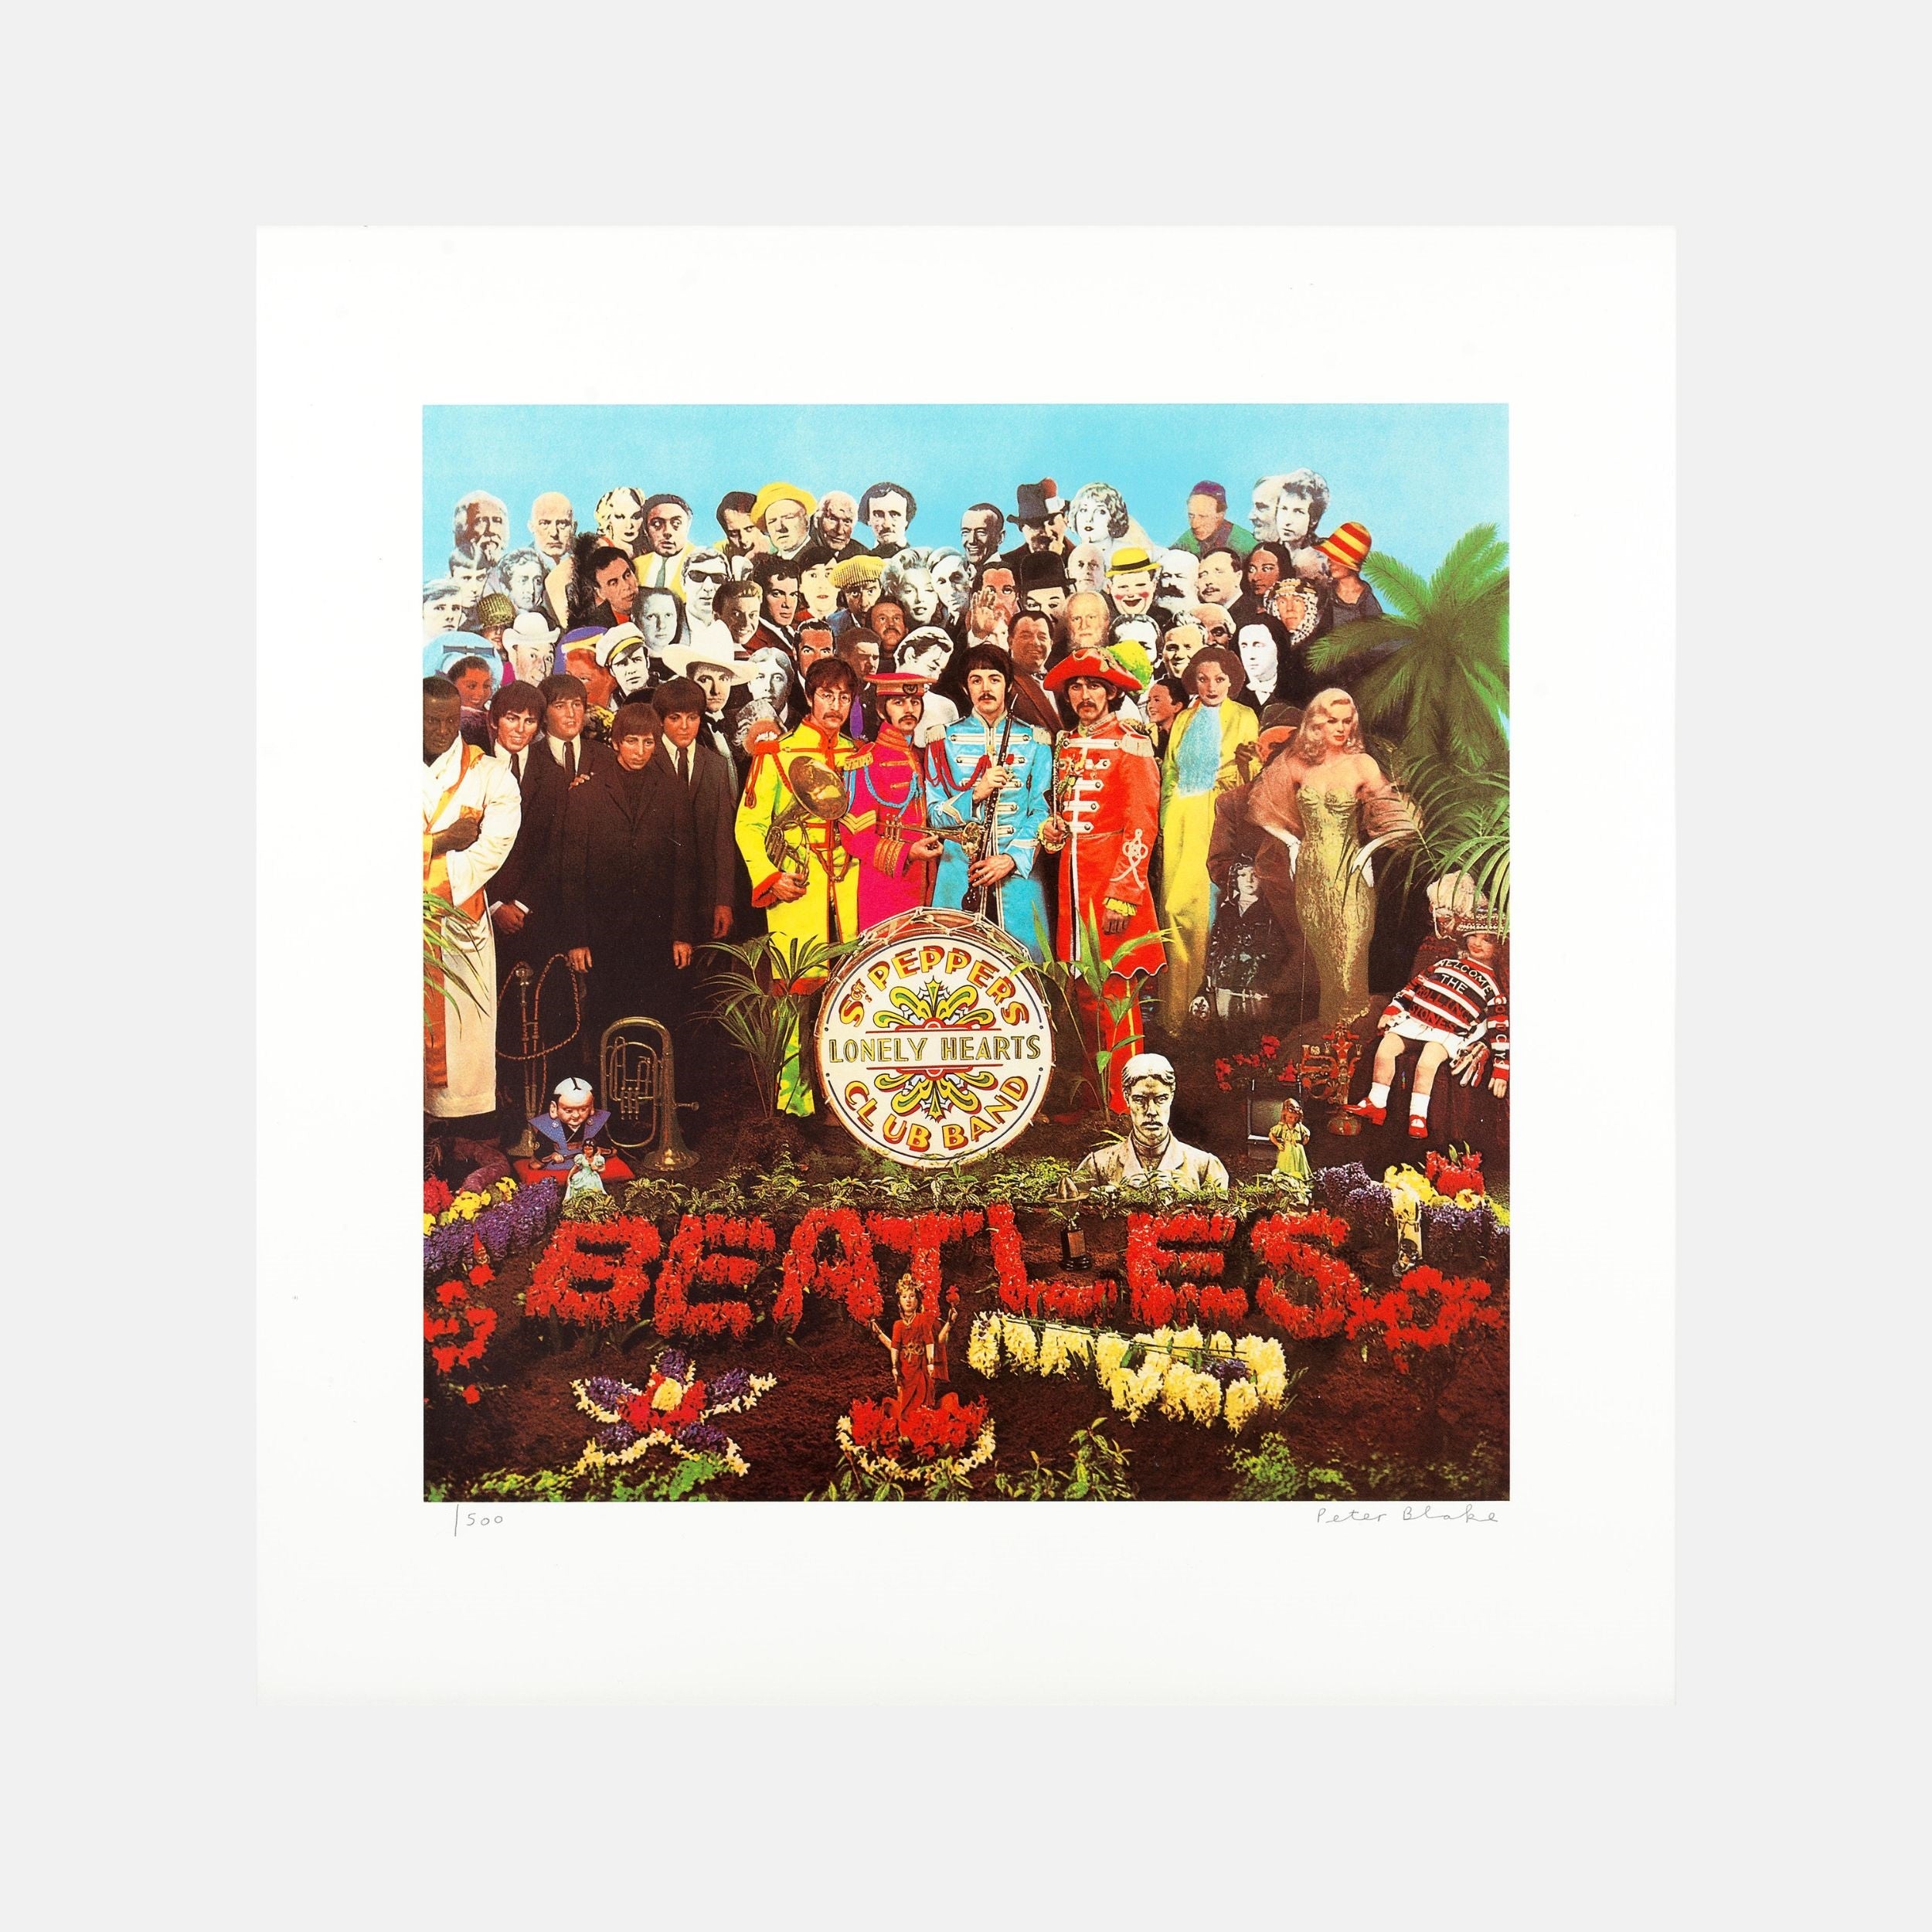 Peter Blake, Sergeant Pepper's Lonely Hearts Club Band, 2007 For Sale - Lougher Contemporary